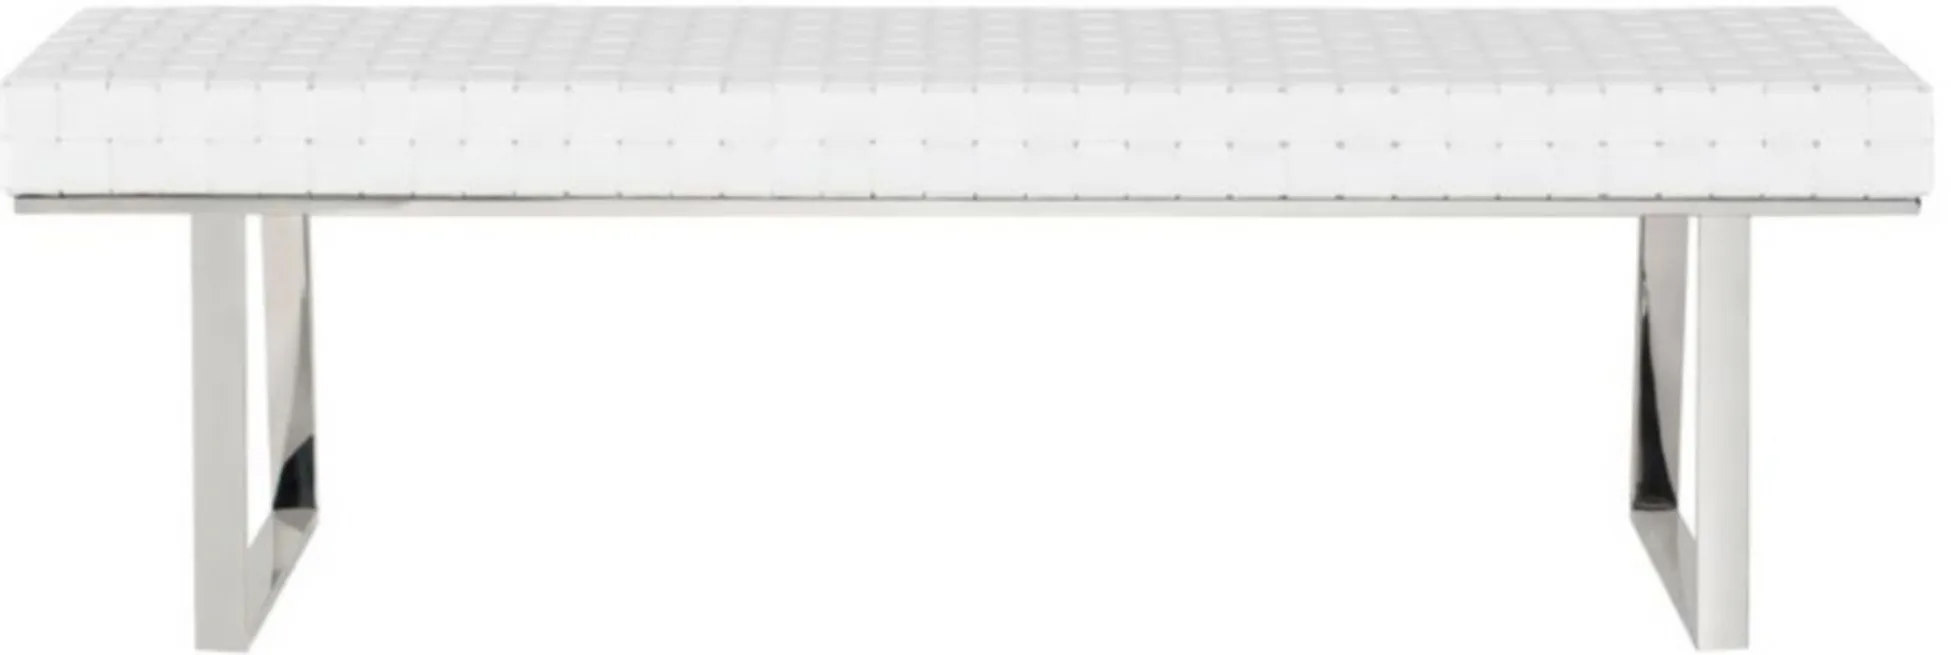 Karlee Occasional Bench in WHITE by Nuevo